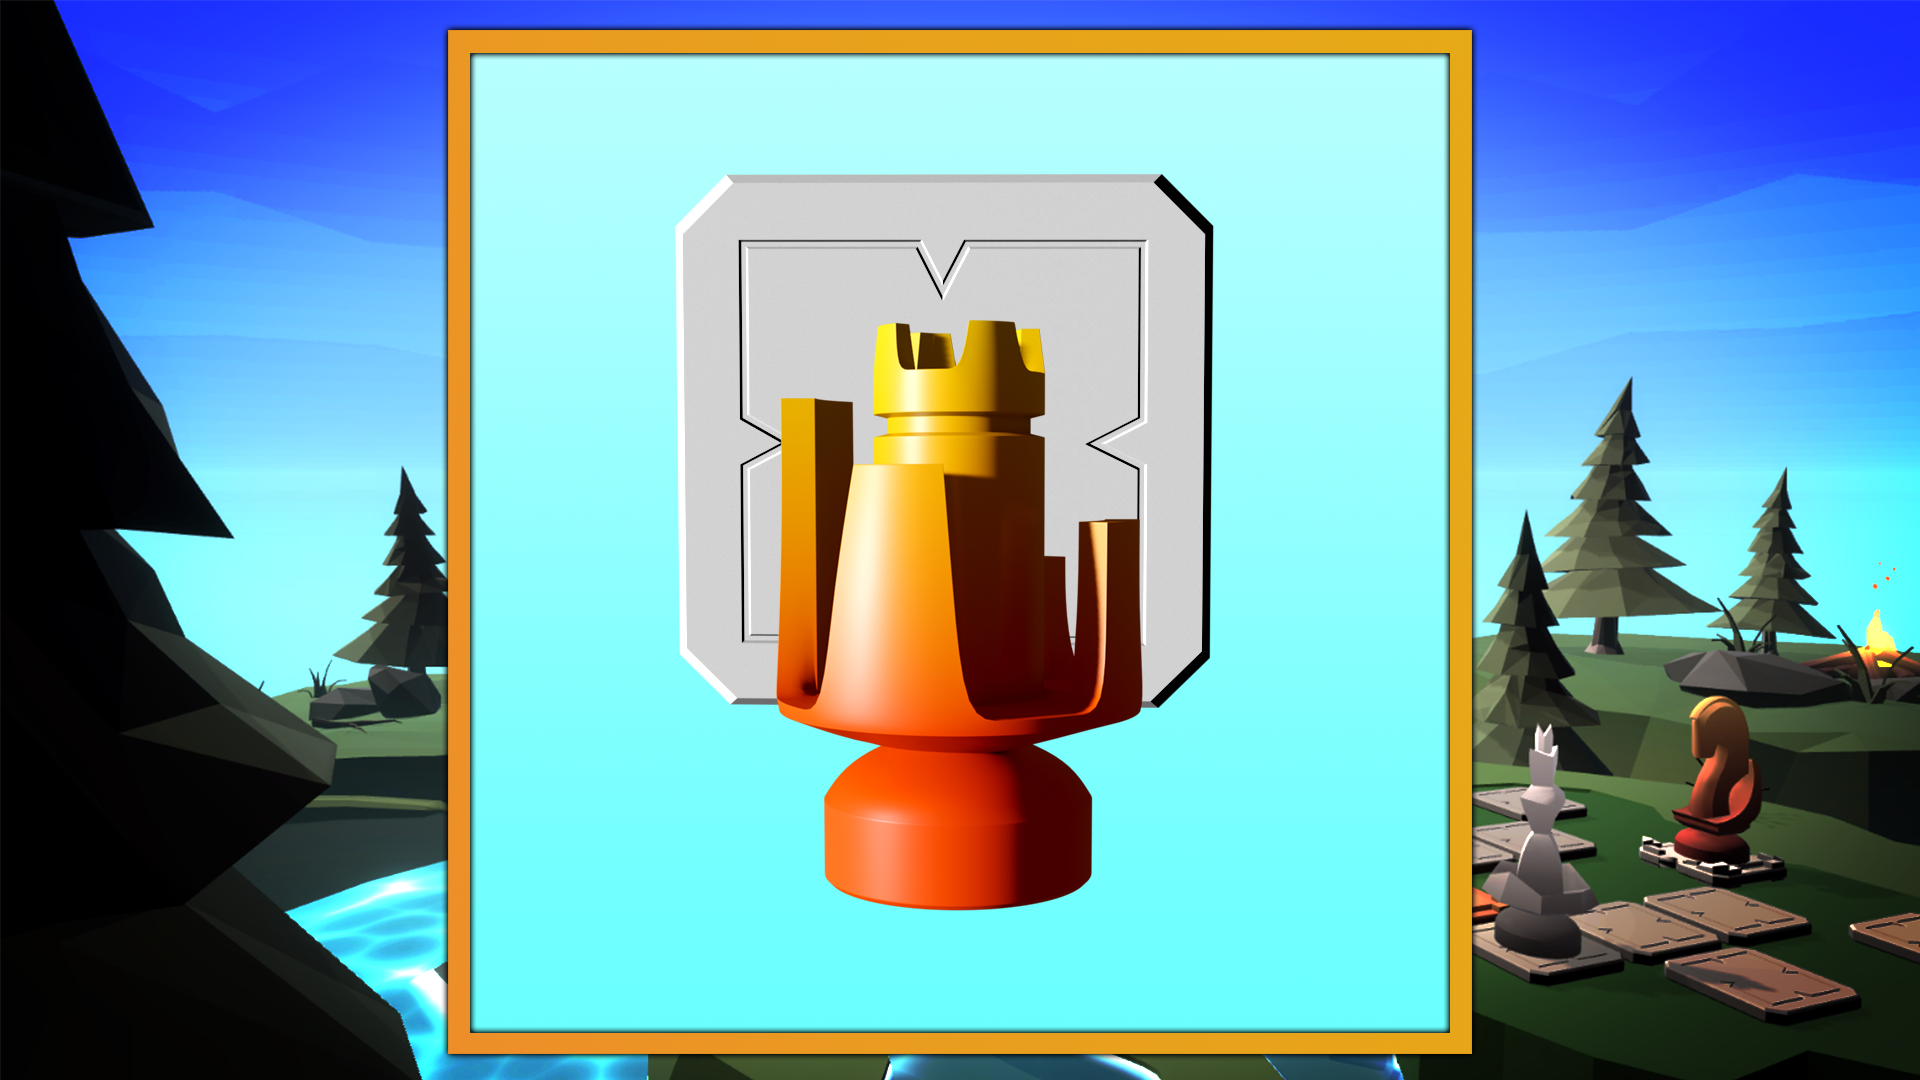 Icon for Untargetability